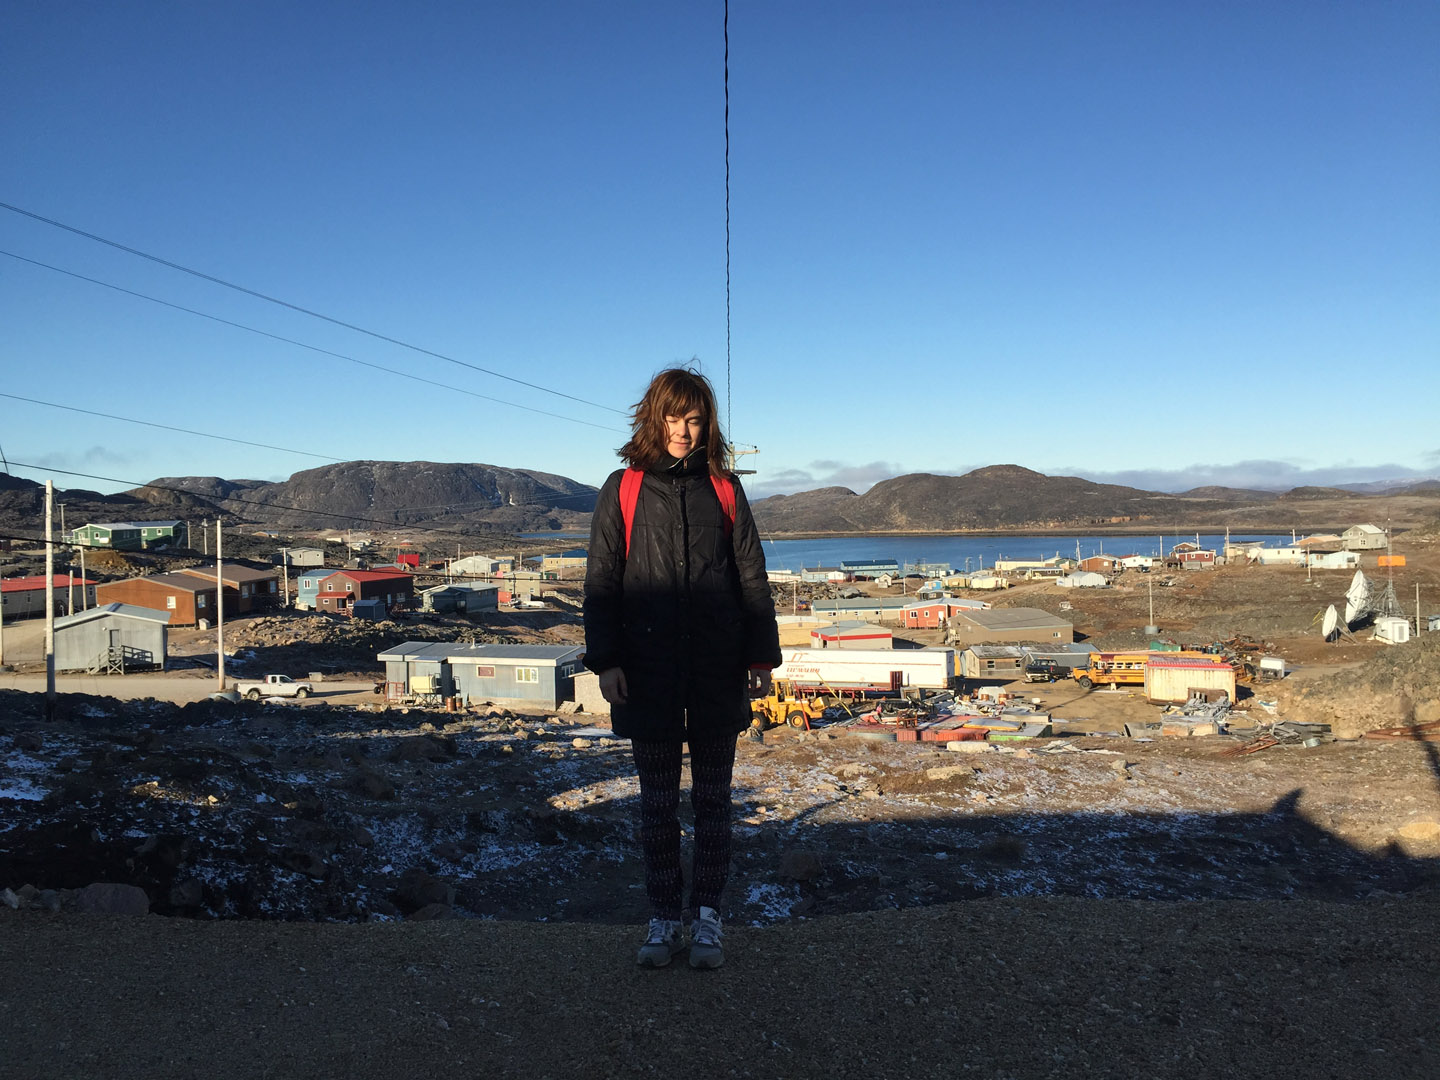 Shary stands above the village of Cape Dorset, near the airport. October 5, '15